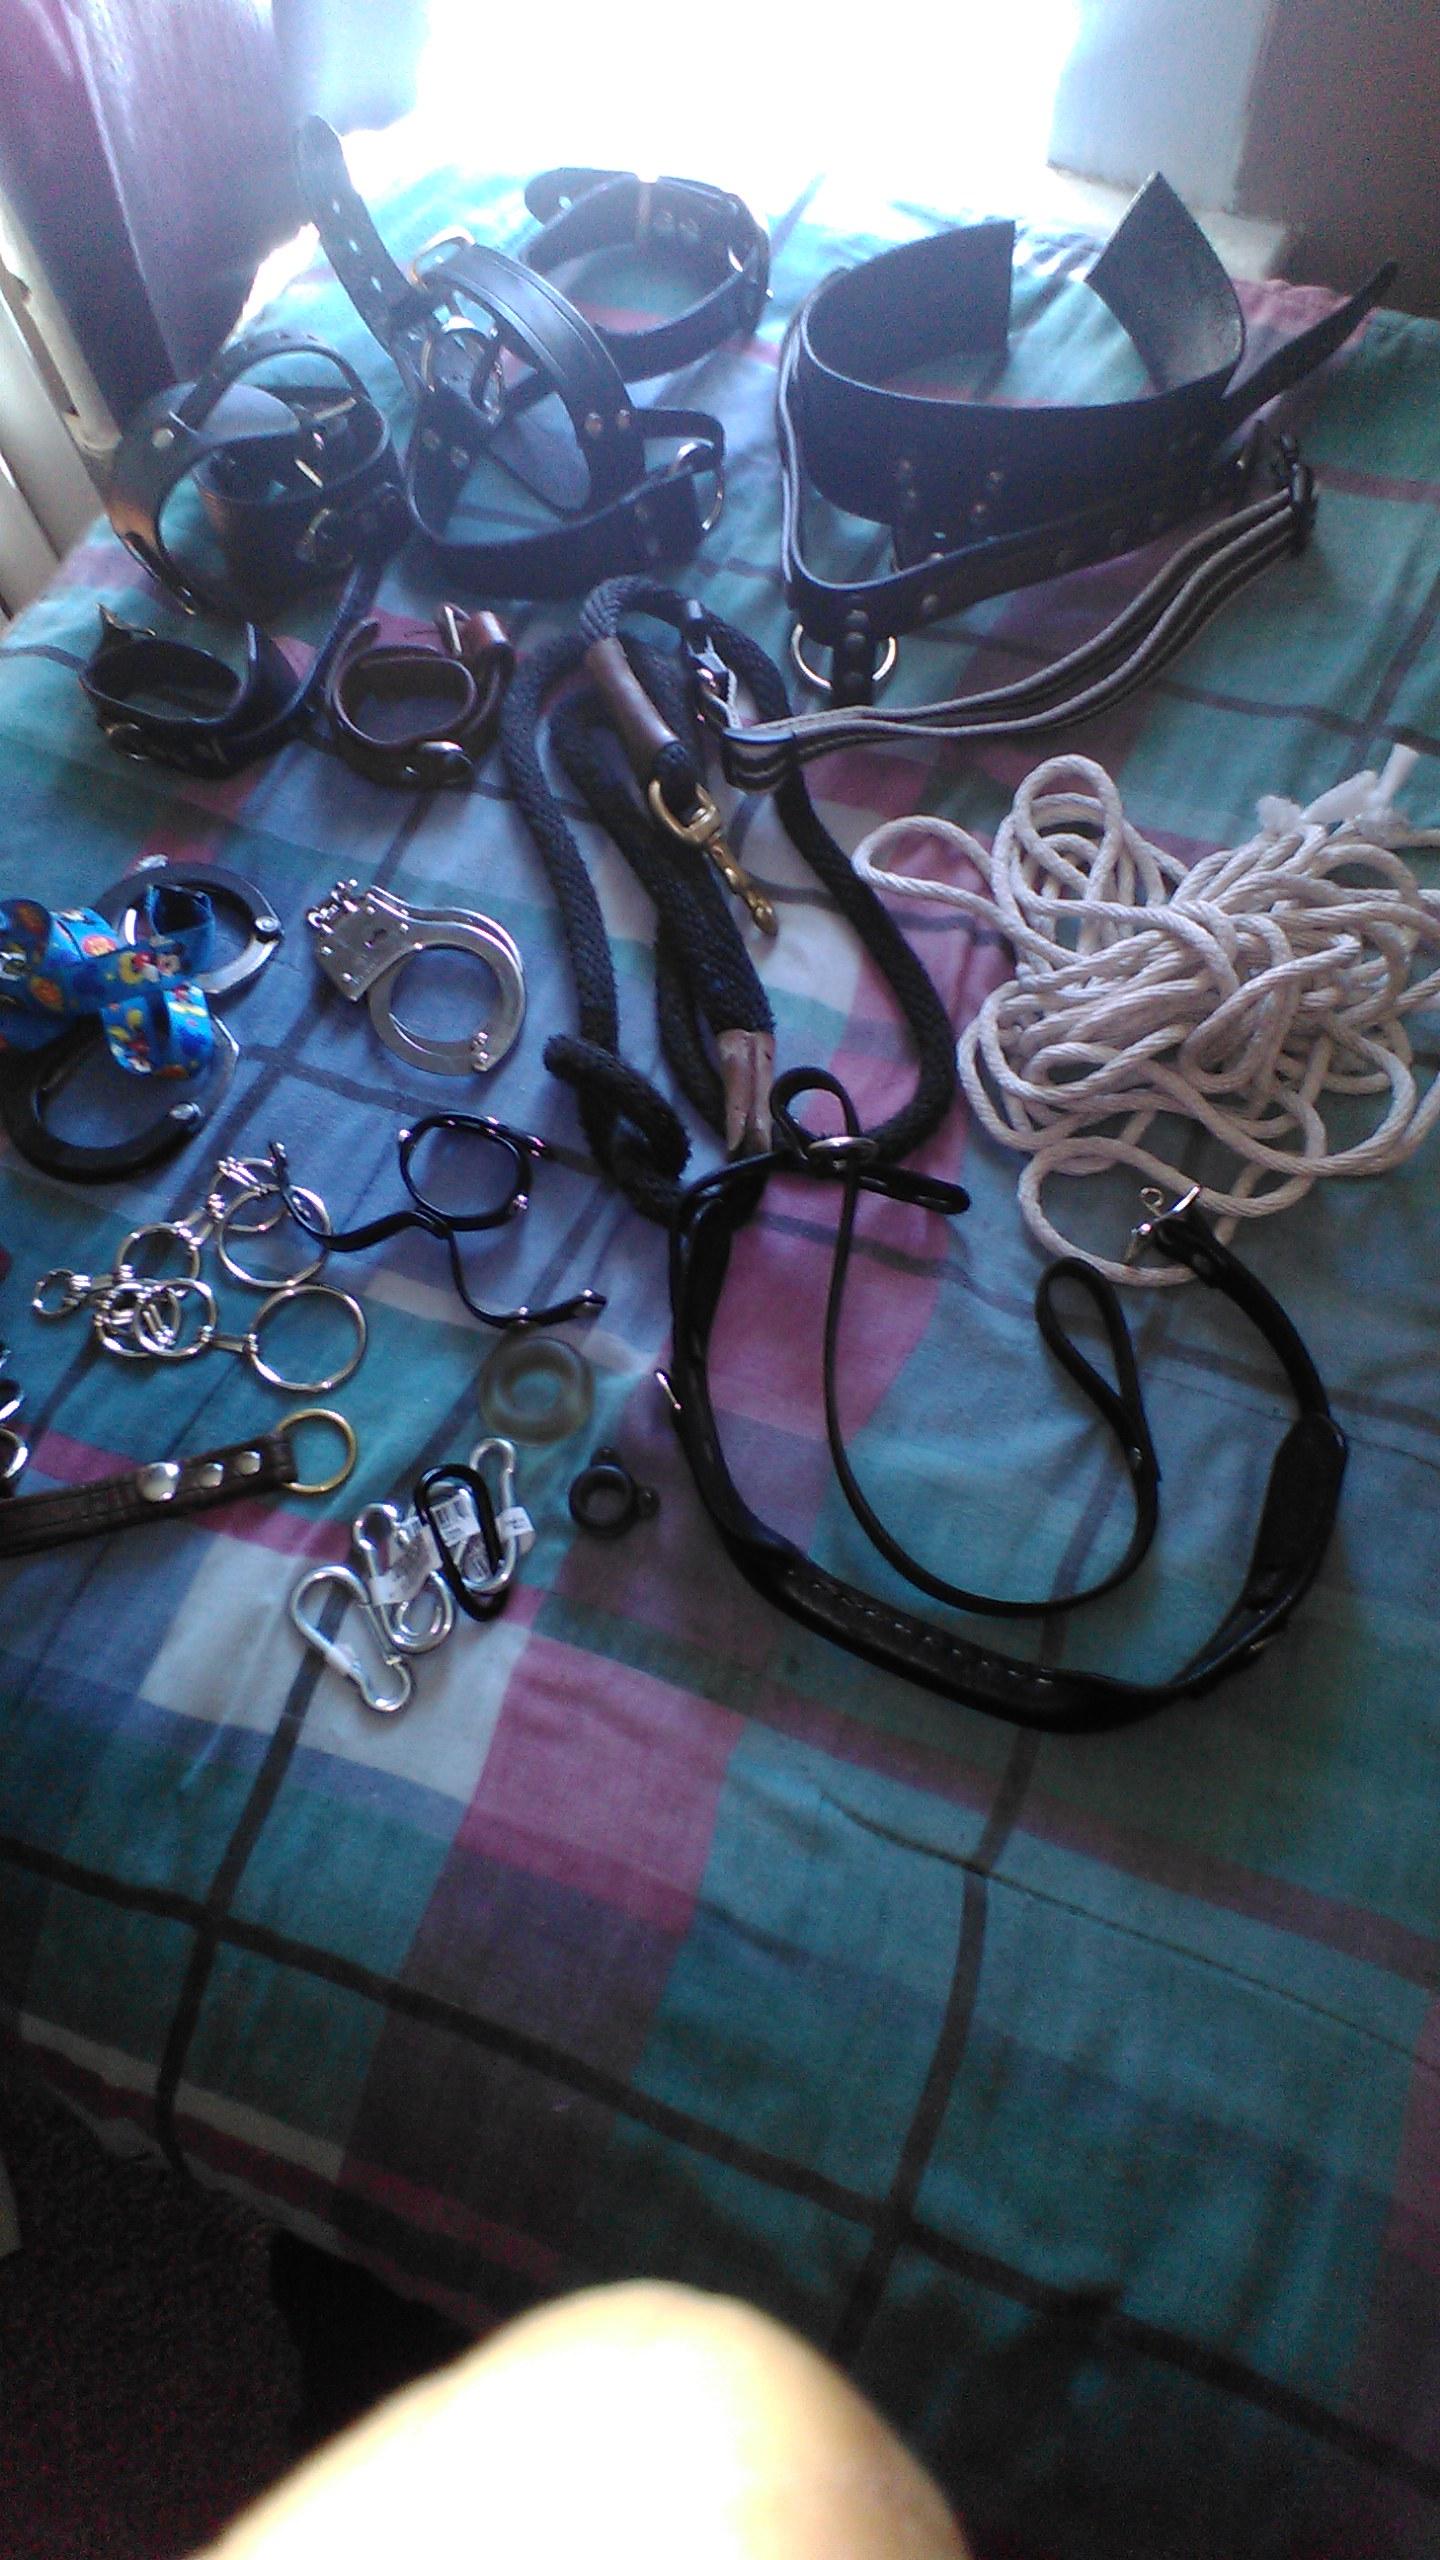 My collection. All leather seen hanade comletely by my bf